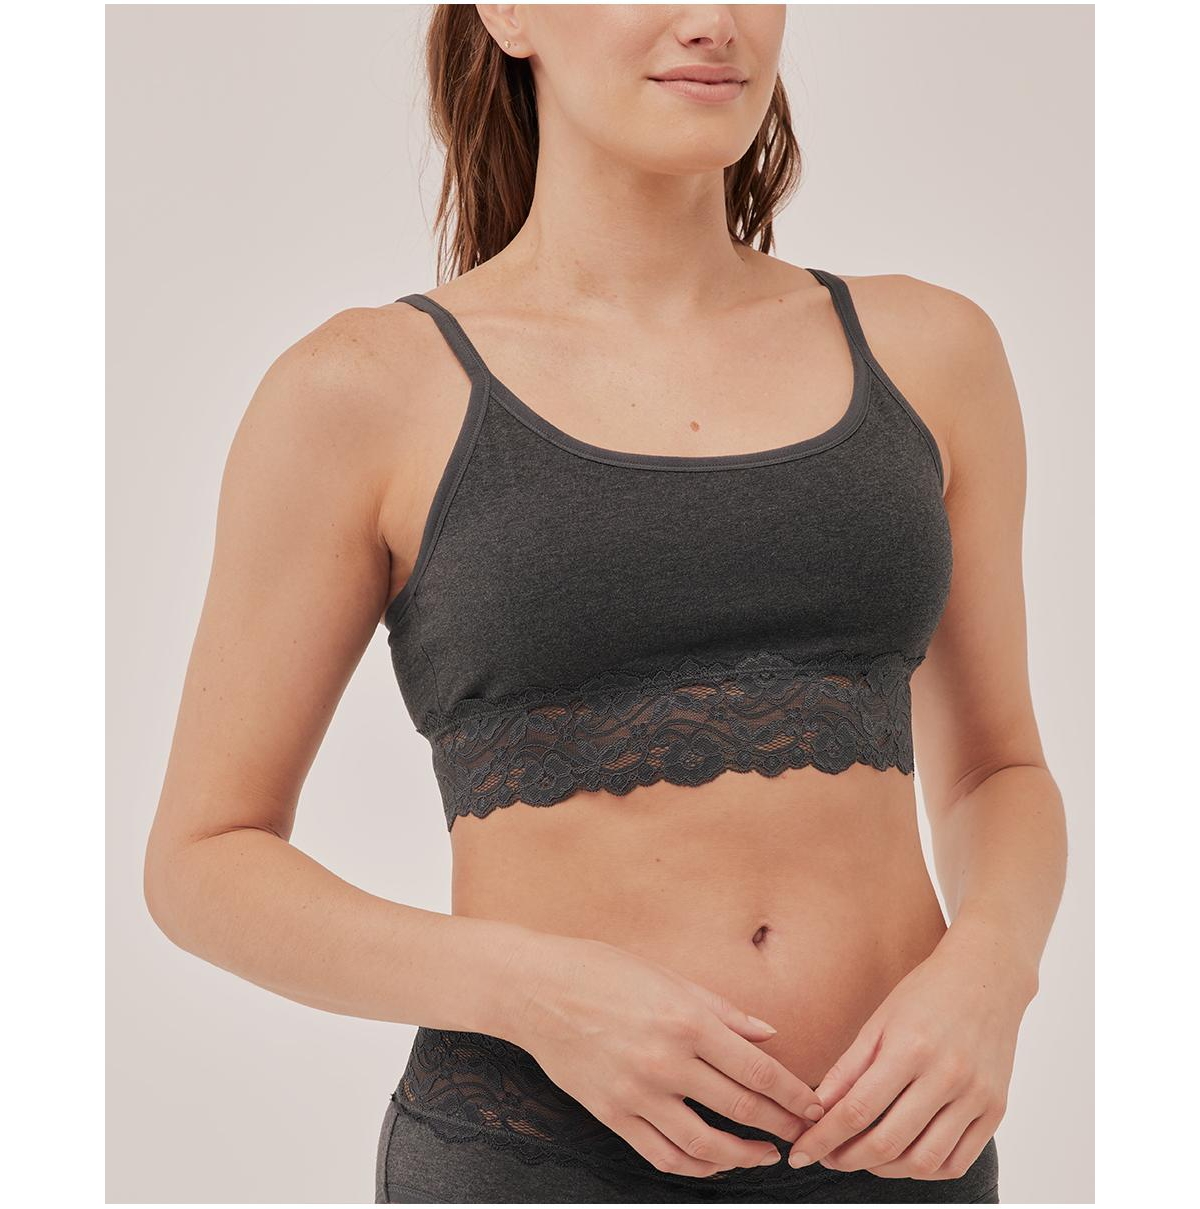 Women's Cotton Lace Smooth Cup Bralette